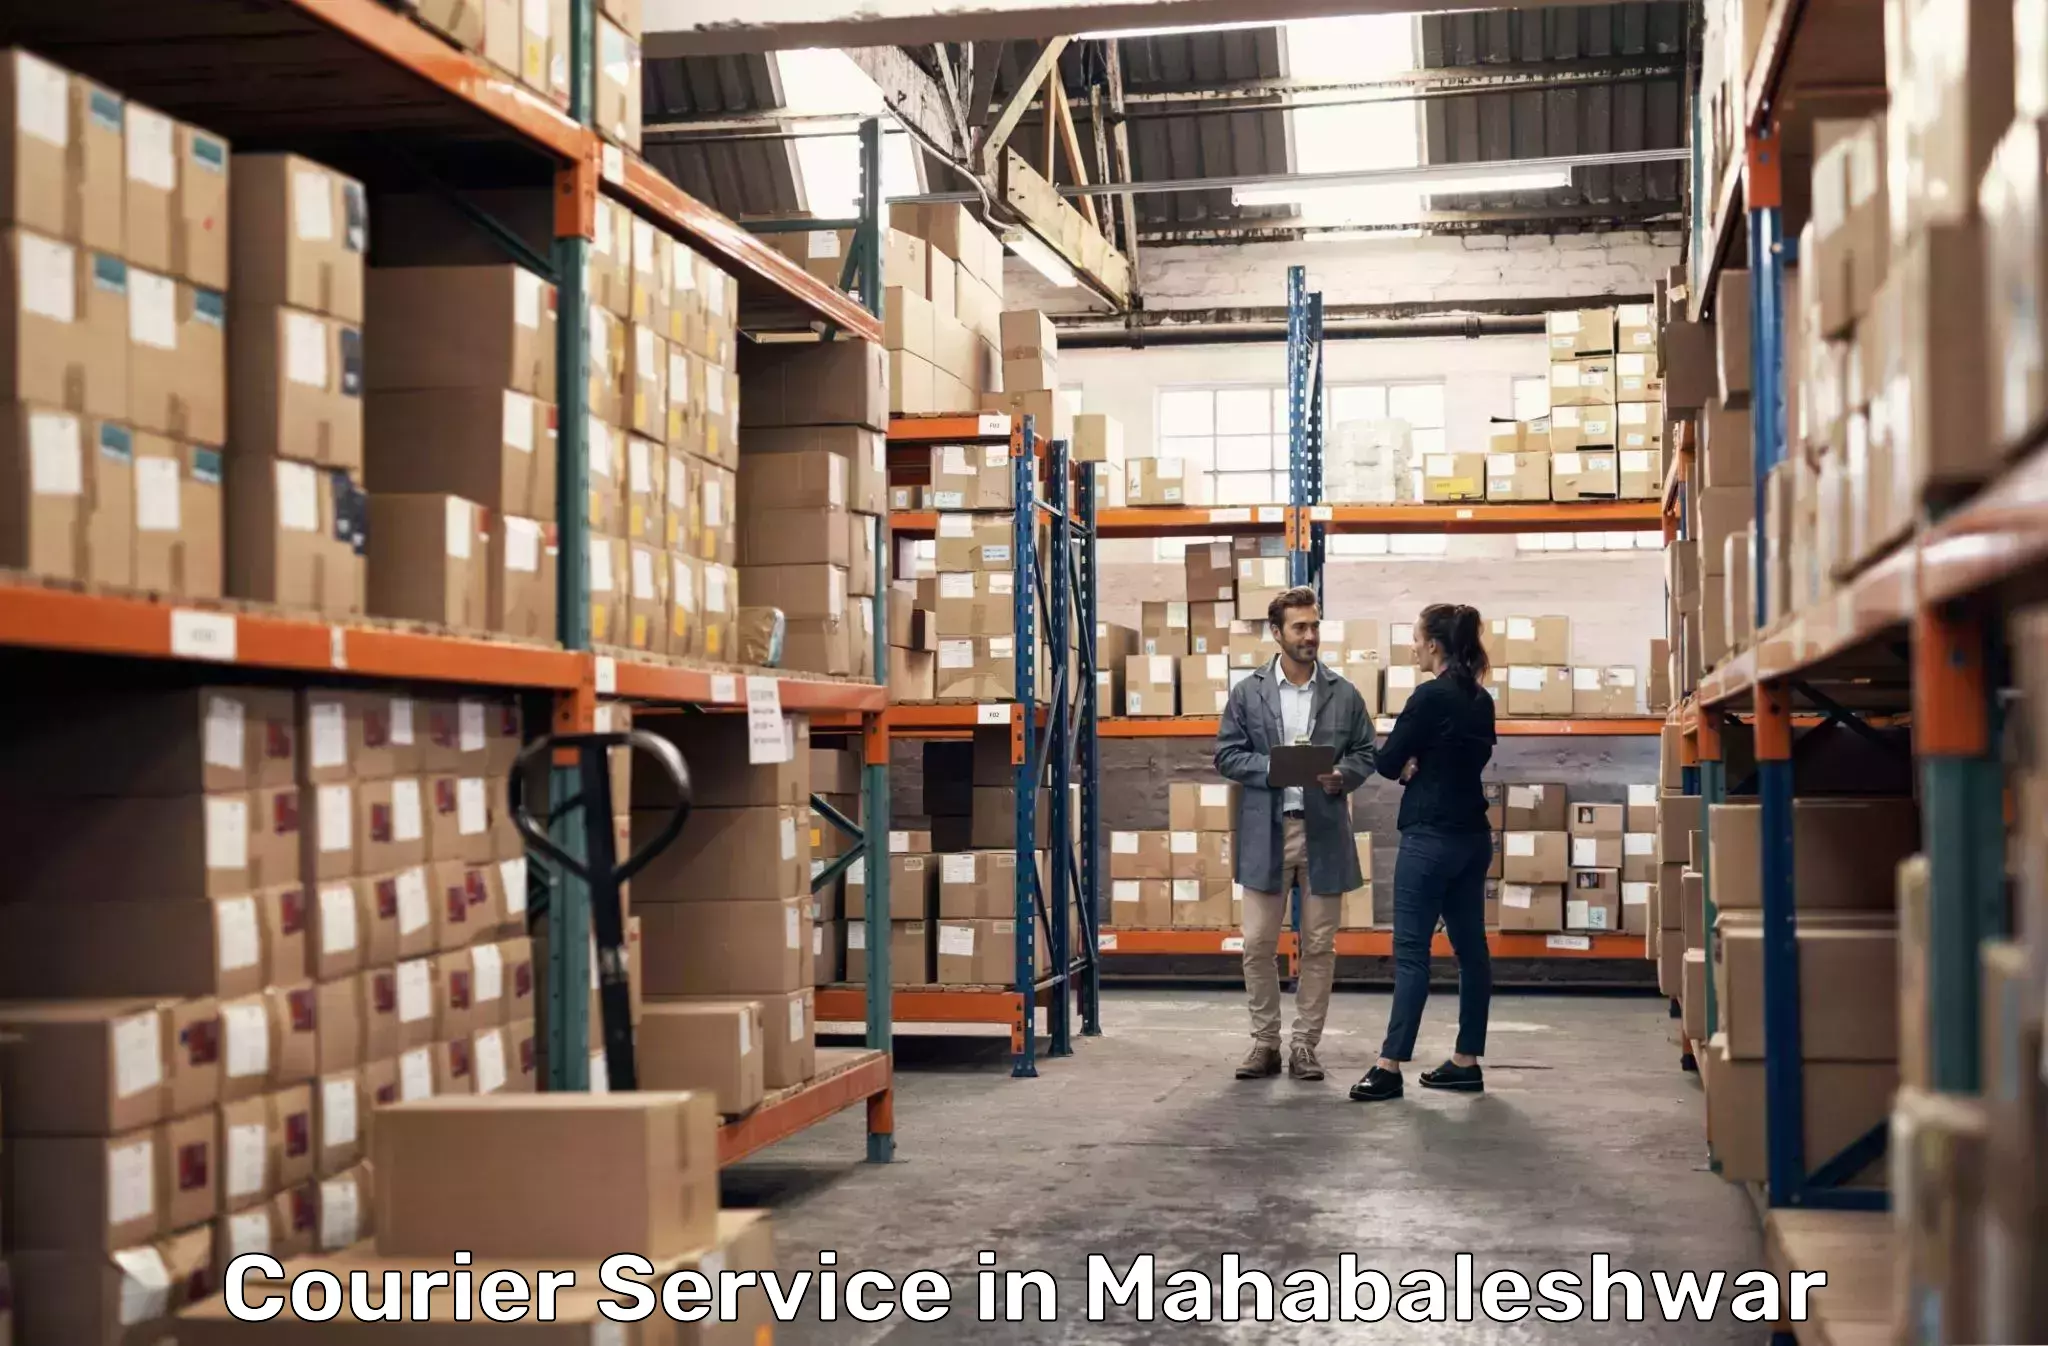 Short distance delivery in Mahabaleshwar